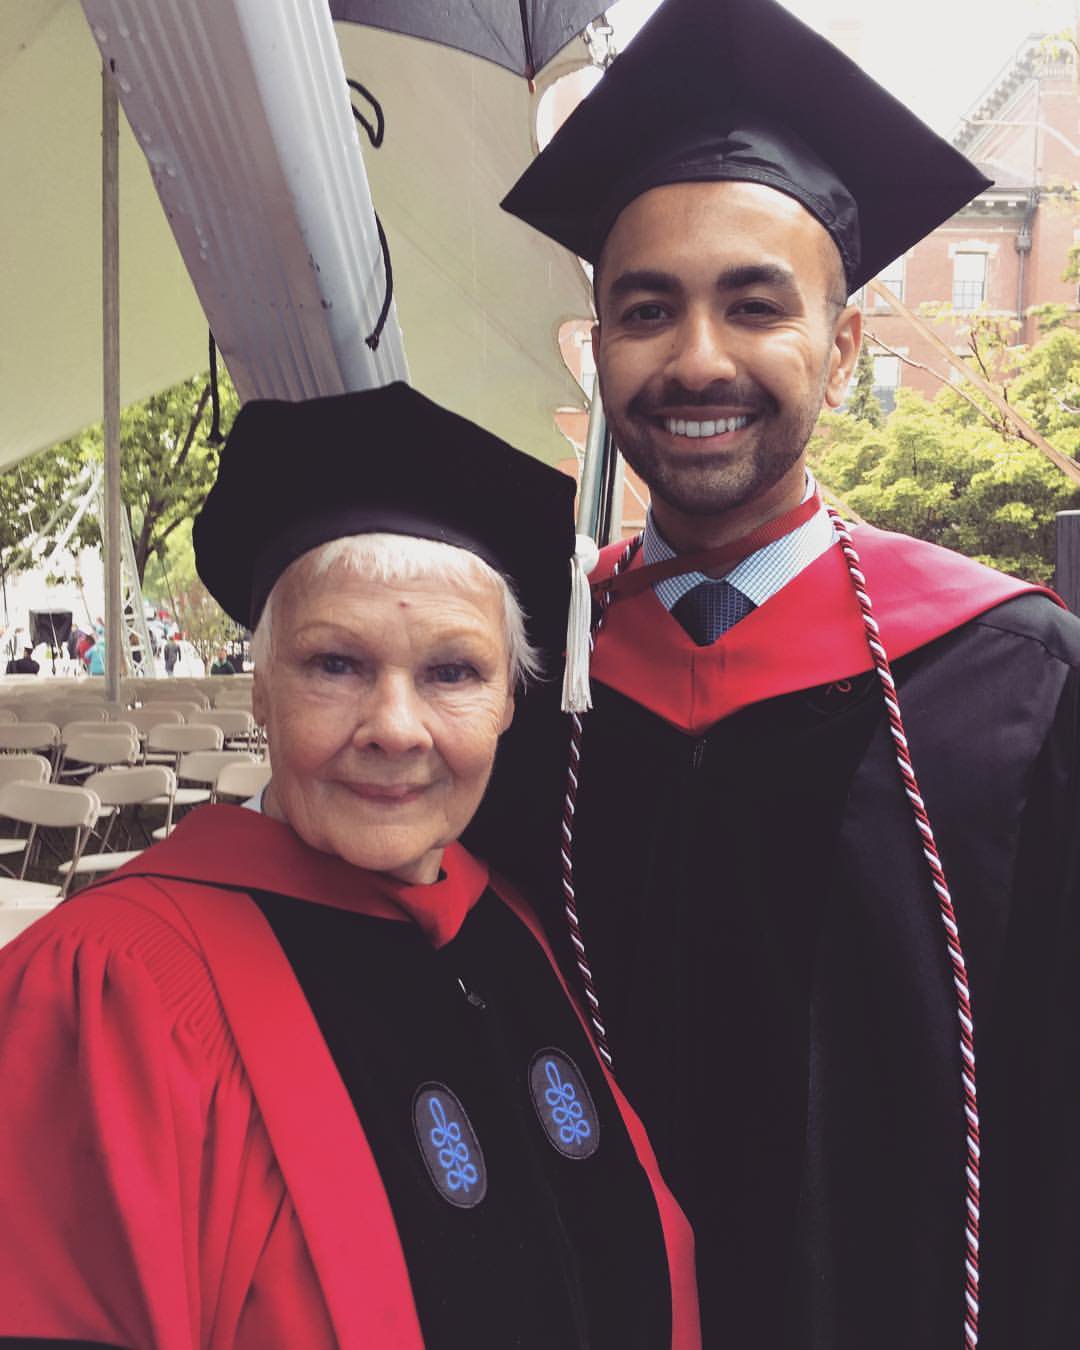 Newly minted HDS grad @Abhishek_Raman and some Dame. #Harvard17 #HDS17 https://t.co/WgpF7gcopc